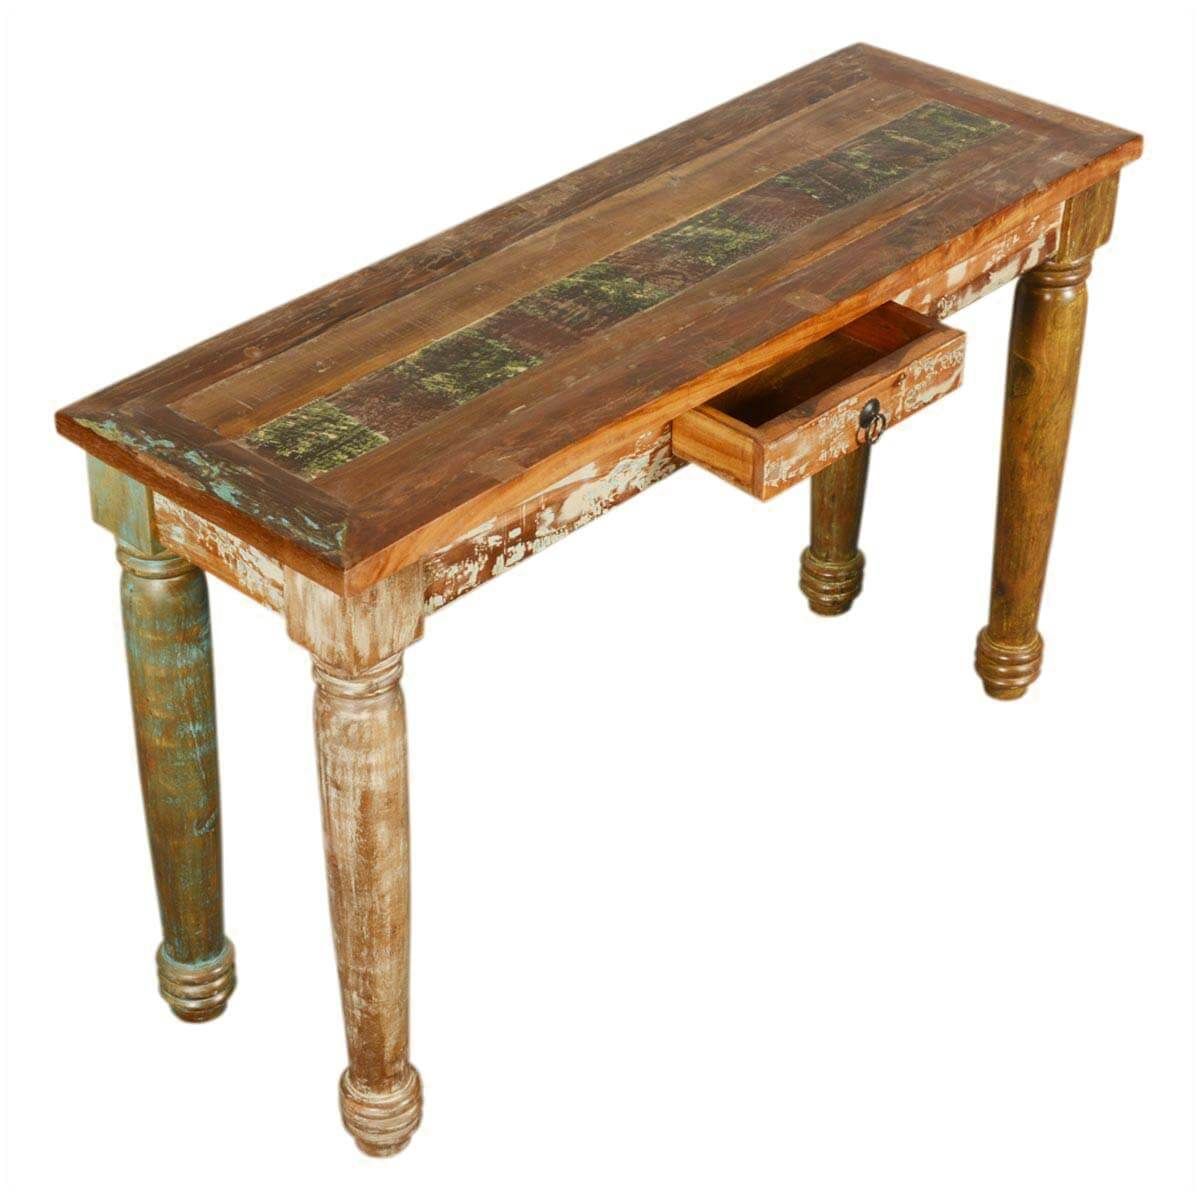 Reclaimed Wood Handcrafted Sofa Entryway Hall Rustic Console Table Regarding Smoked Barnwood Console Tables (View 7 of 20)